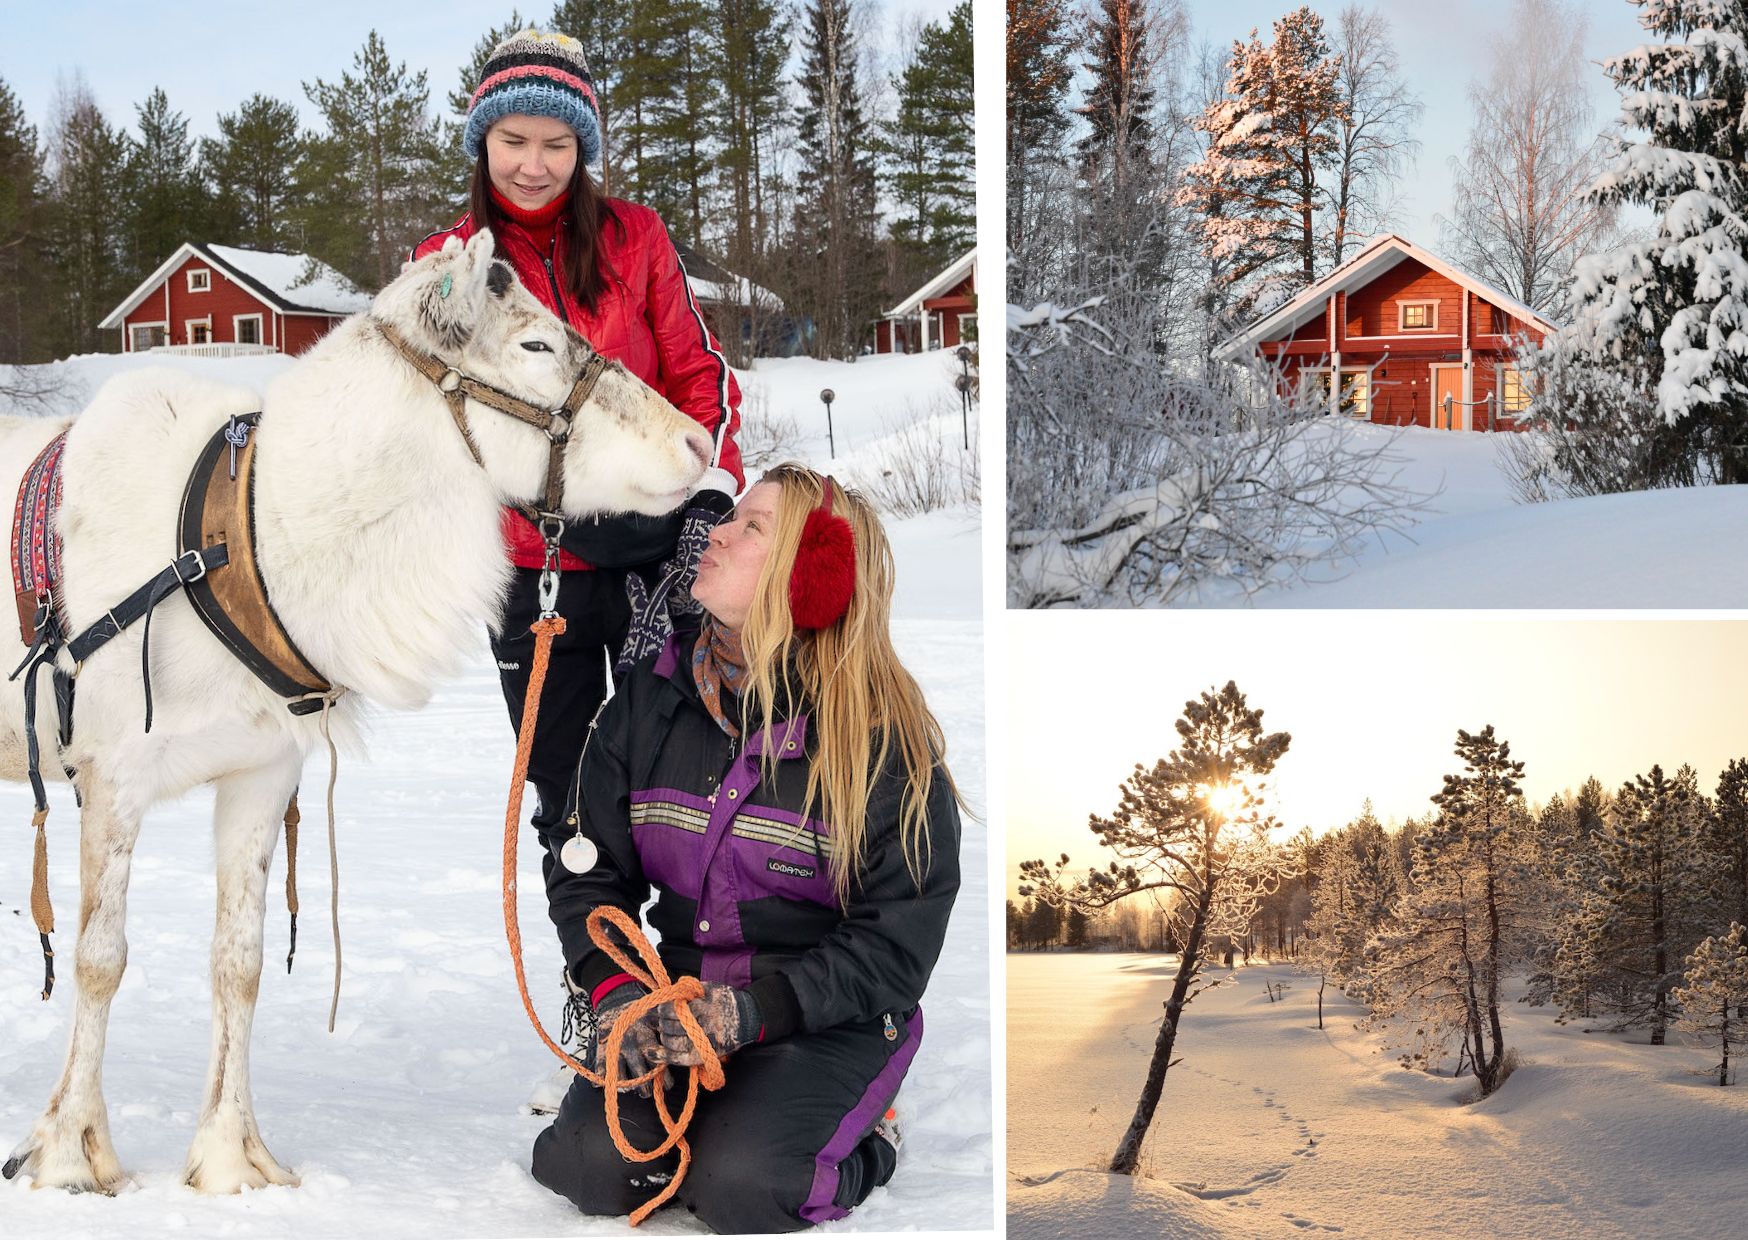 Winter holiday package with snowshoes, skis and kicksledge. 